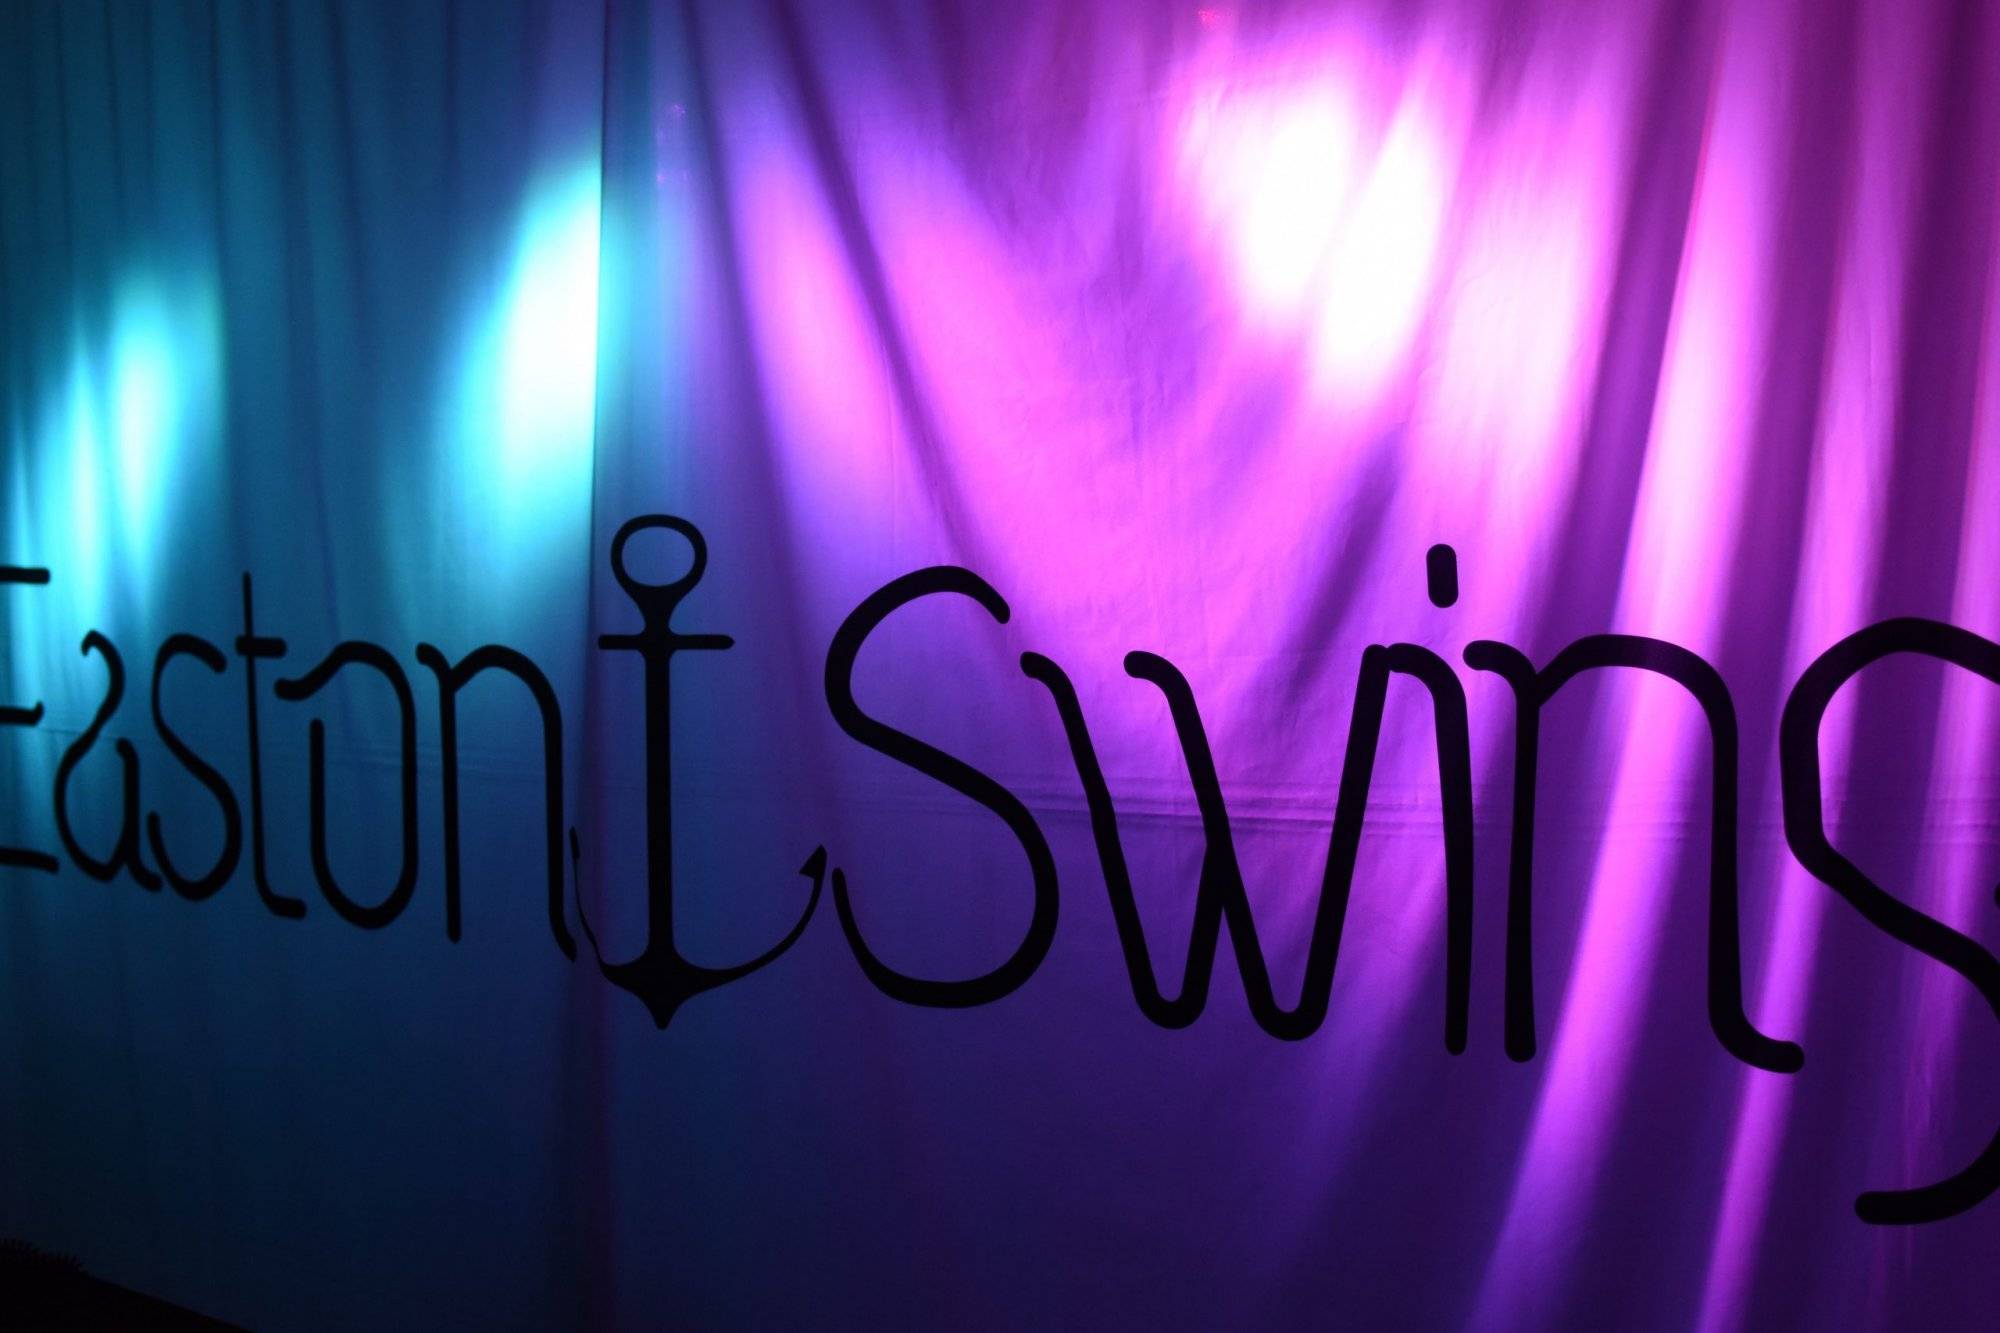 West coast swing freestyle, A back lit cloth backdrop displaying company logo for EastonSwing in Black